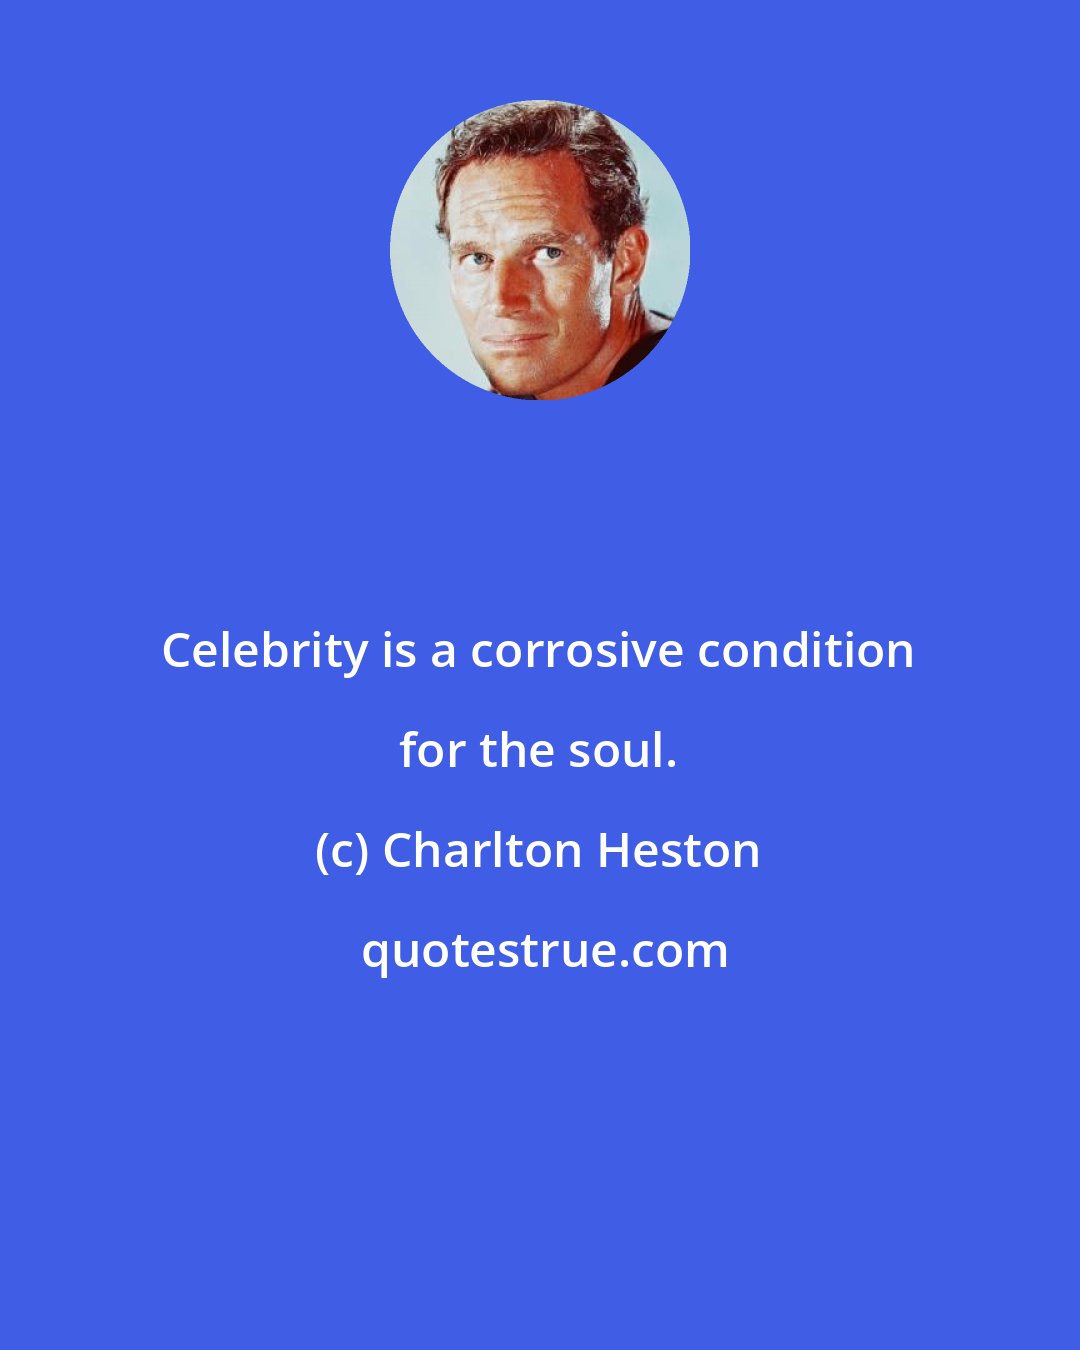 Charlton Heston: Celebrity is a corrosive condition for the soul.